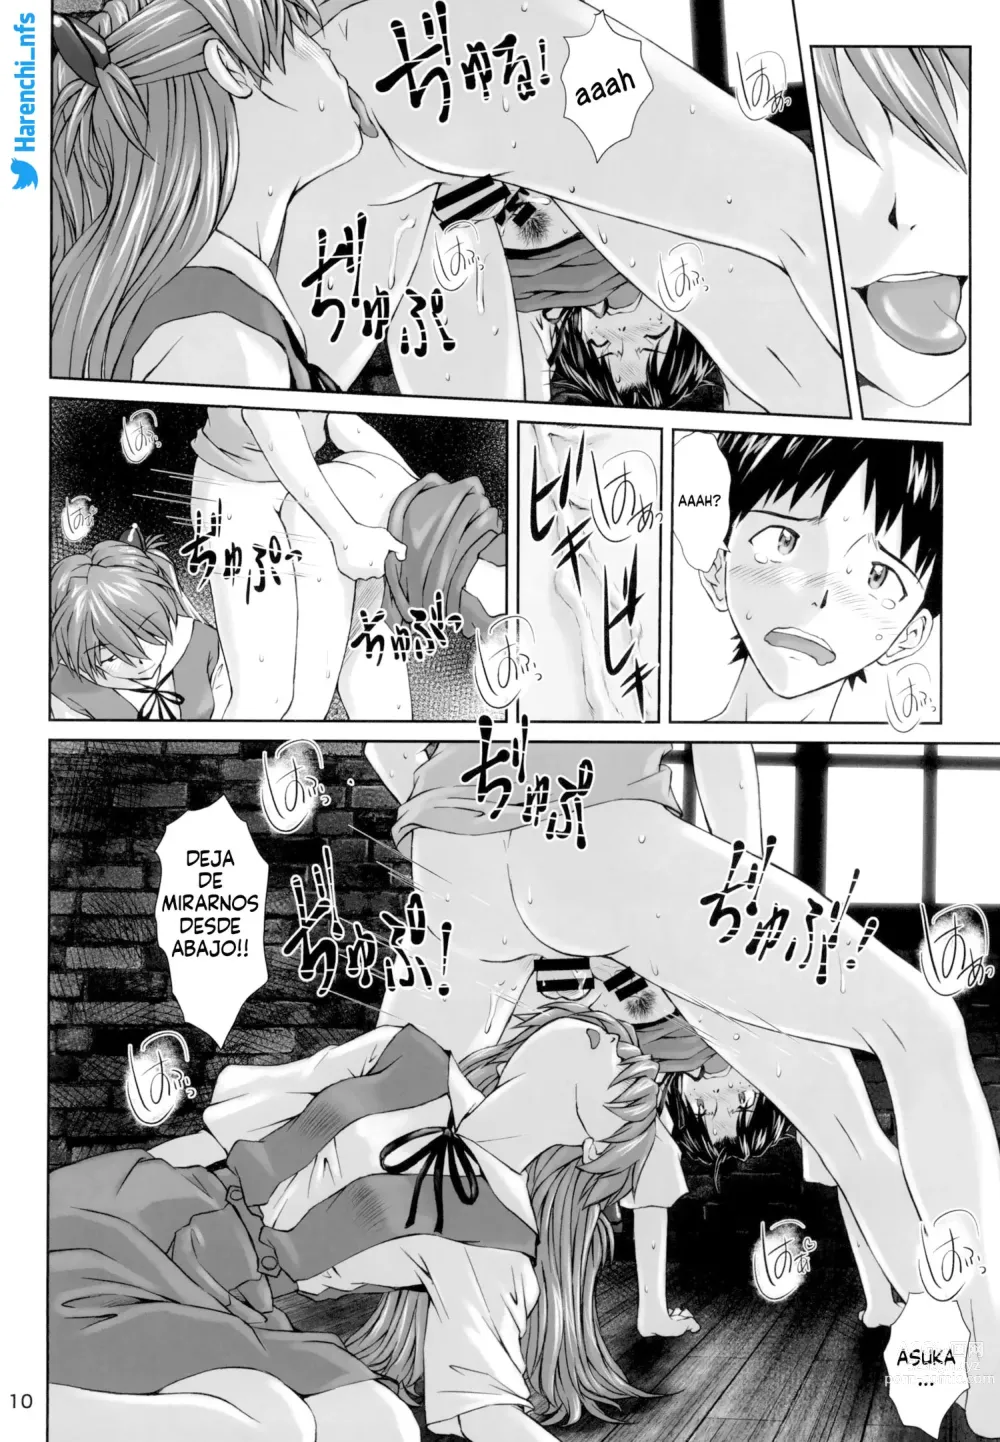 Page 10 of doujinshi Side effect